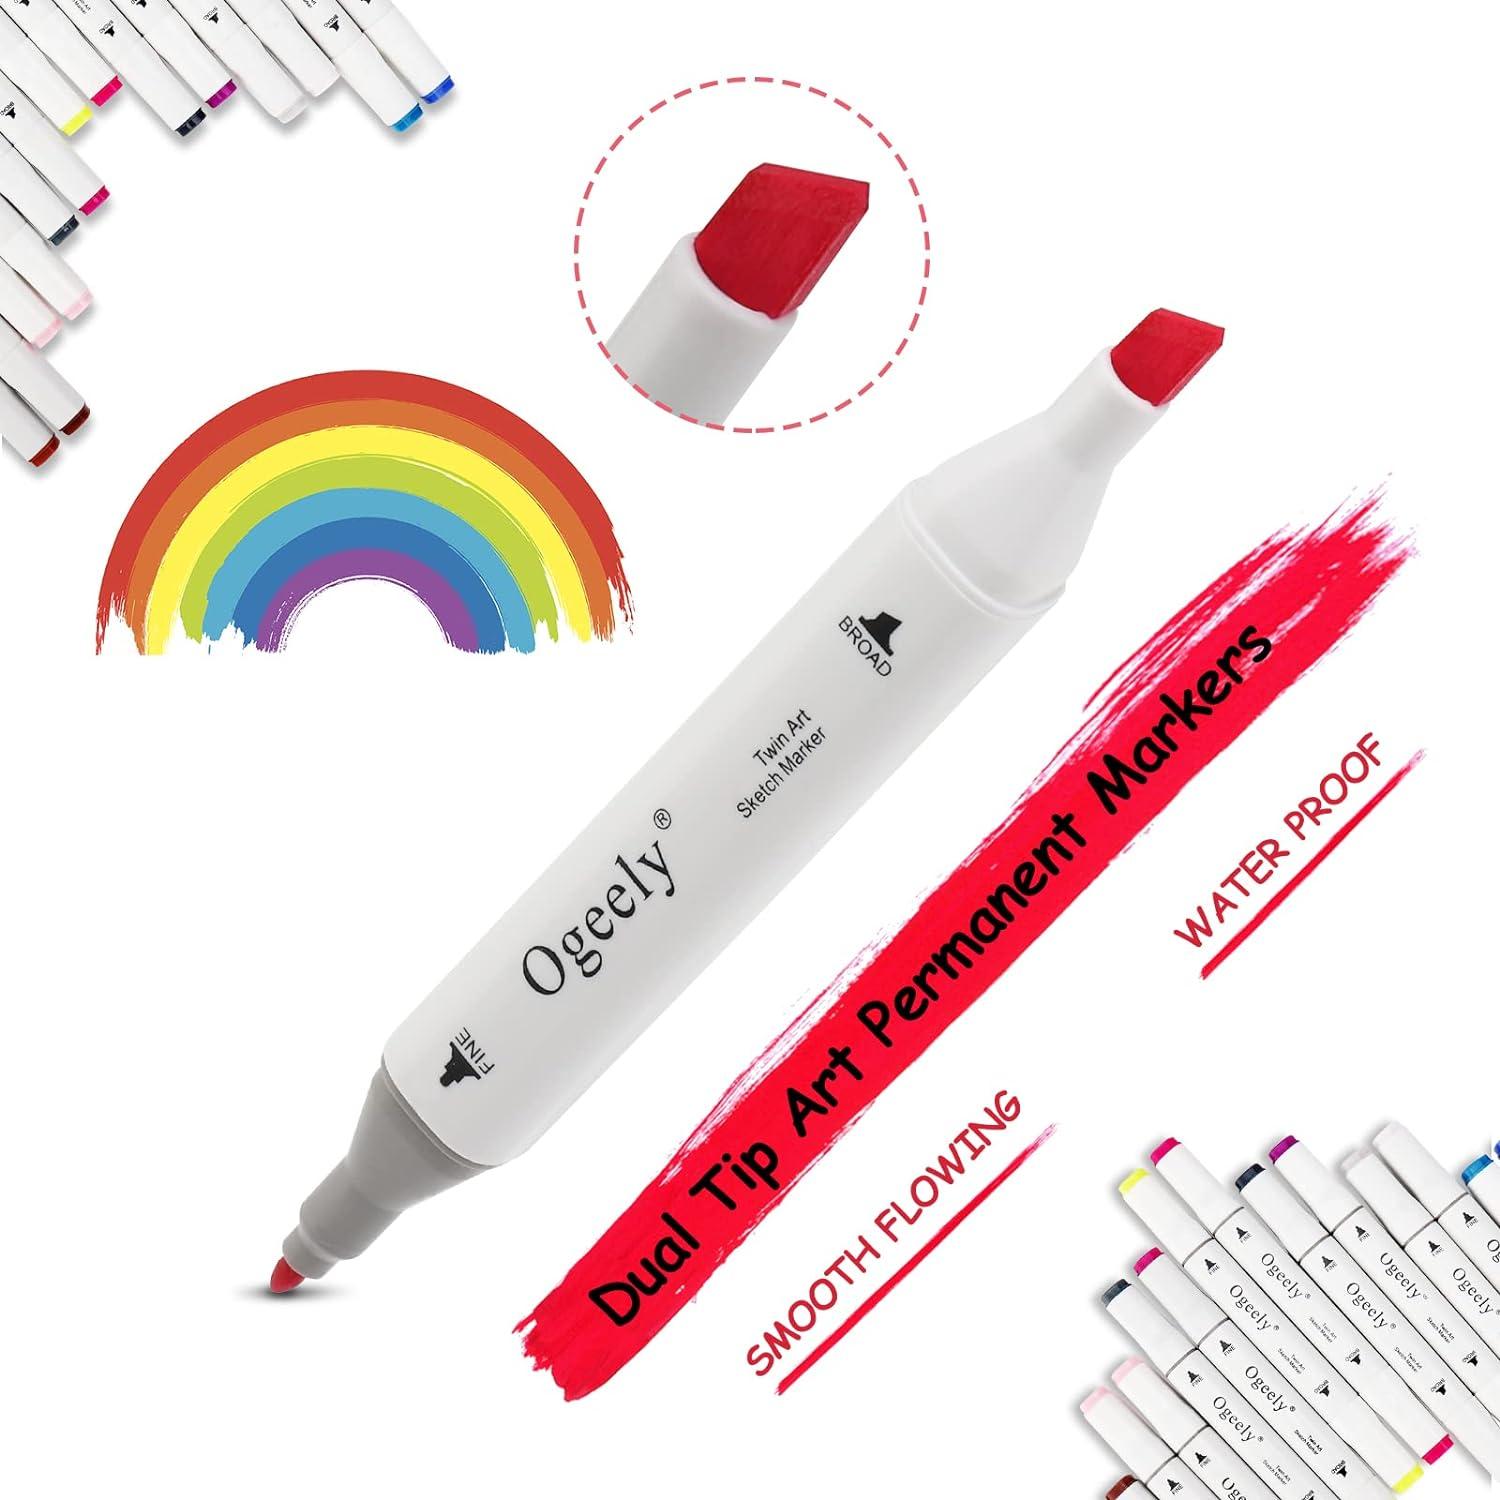 Alcohol Markers, 120 Colors Dual Tip Permanent Art Markers for Kids Adults  Coloring Illustrations Sketch,Christmas Gifts 